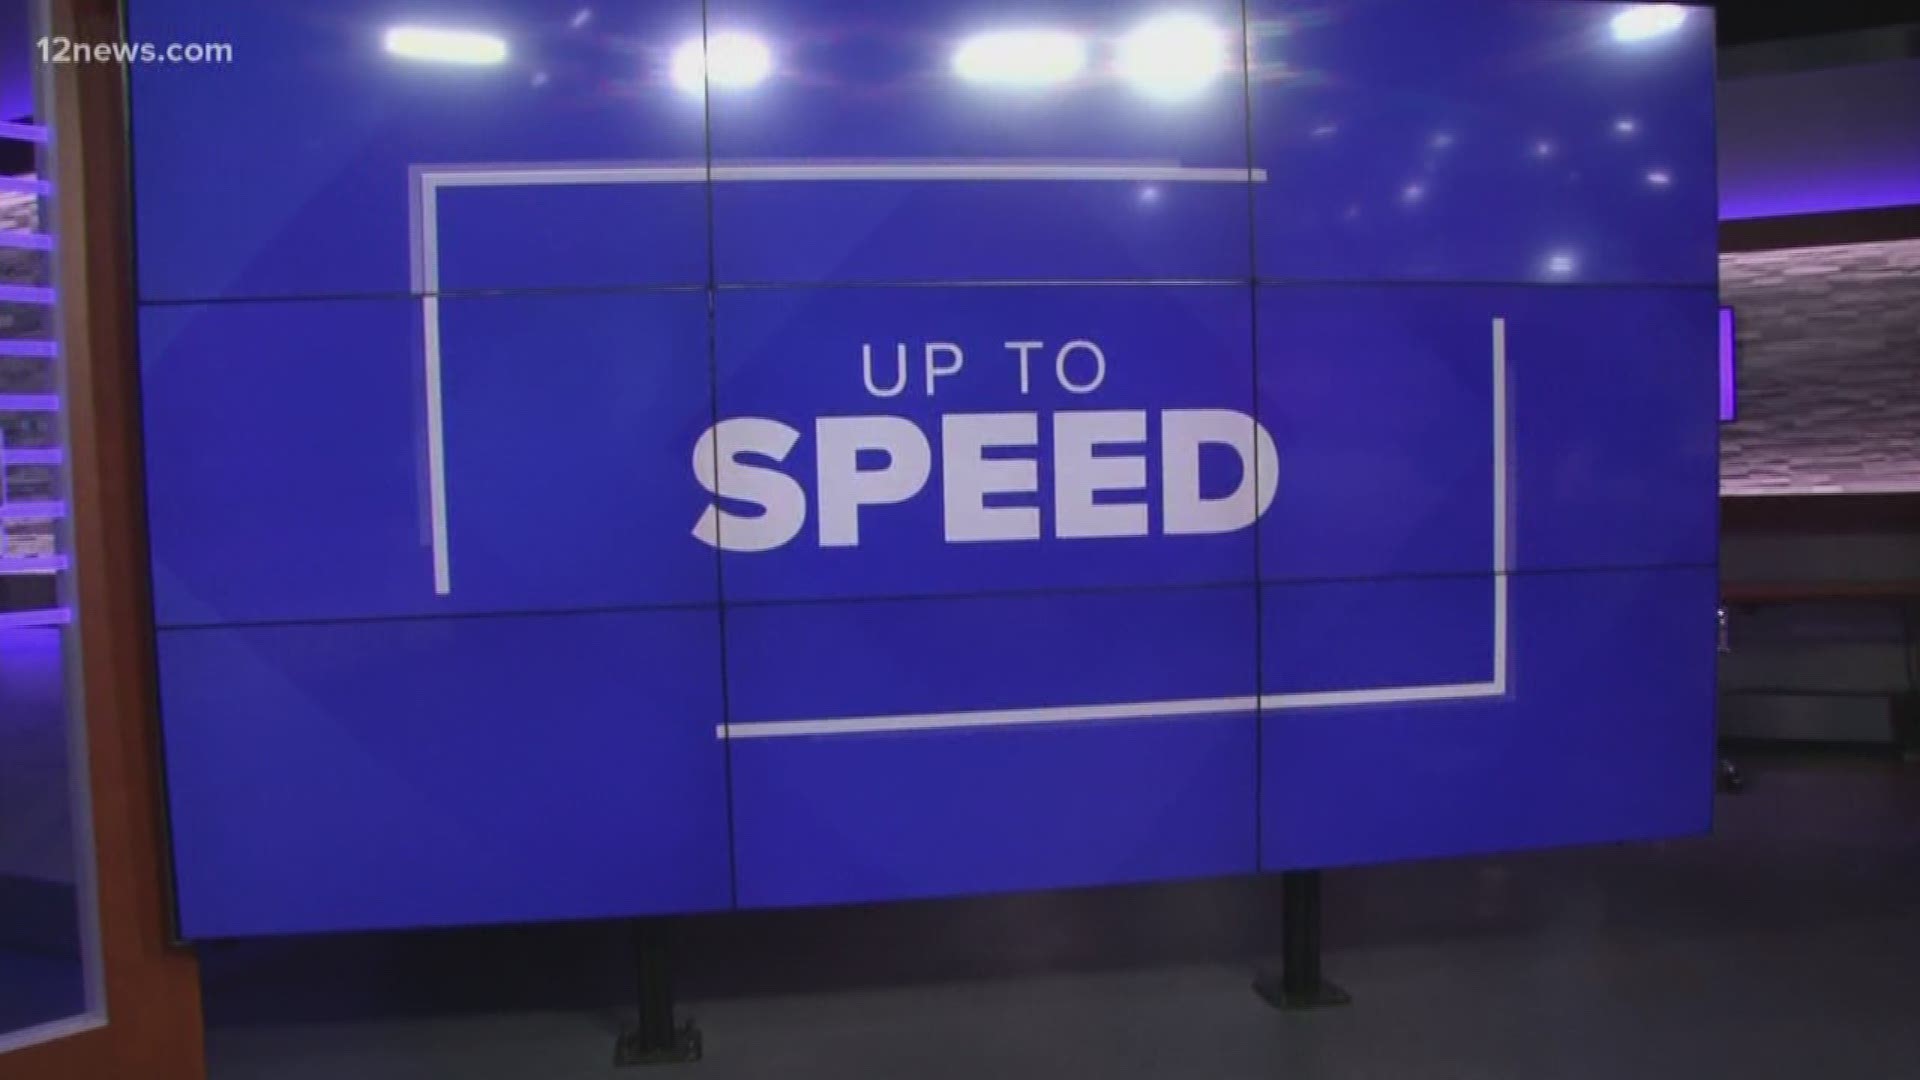 We get you "Up to Speed" on the latest news happening around the Valley and across the nation on Monday afternoon.